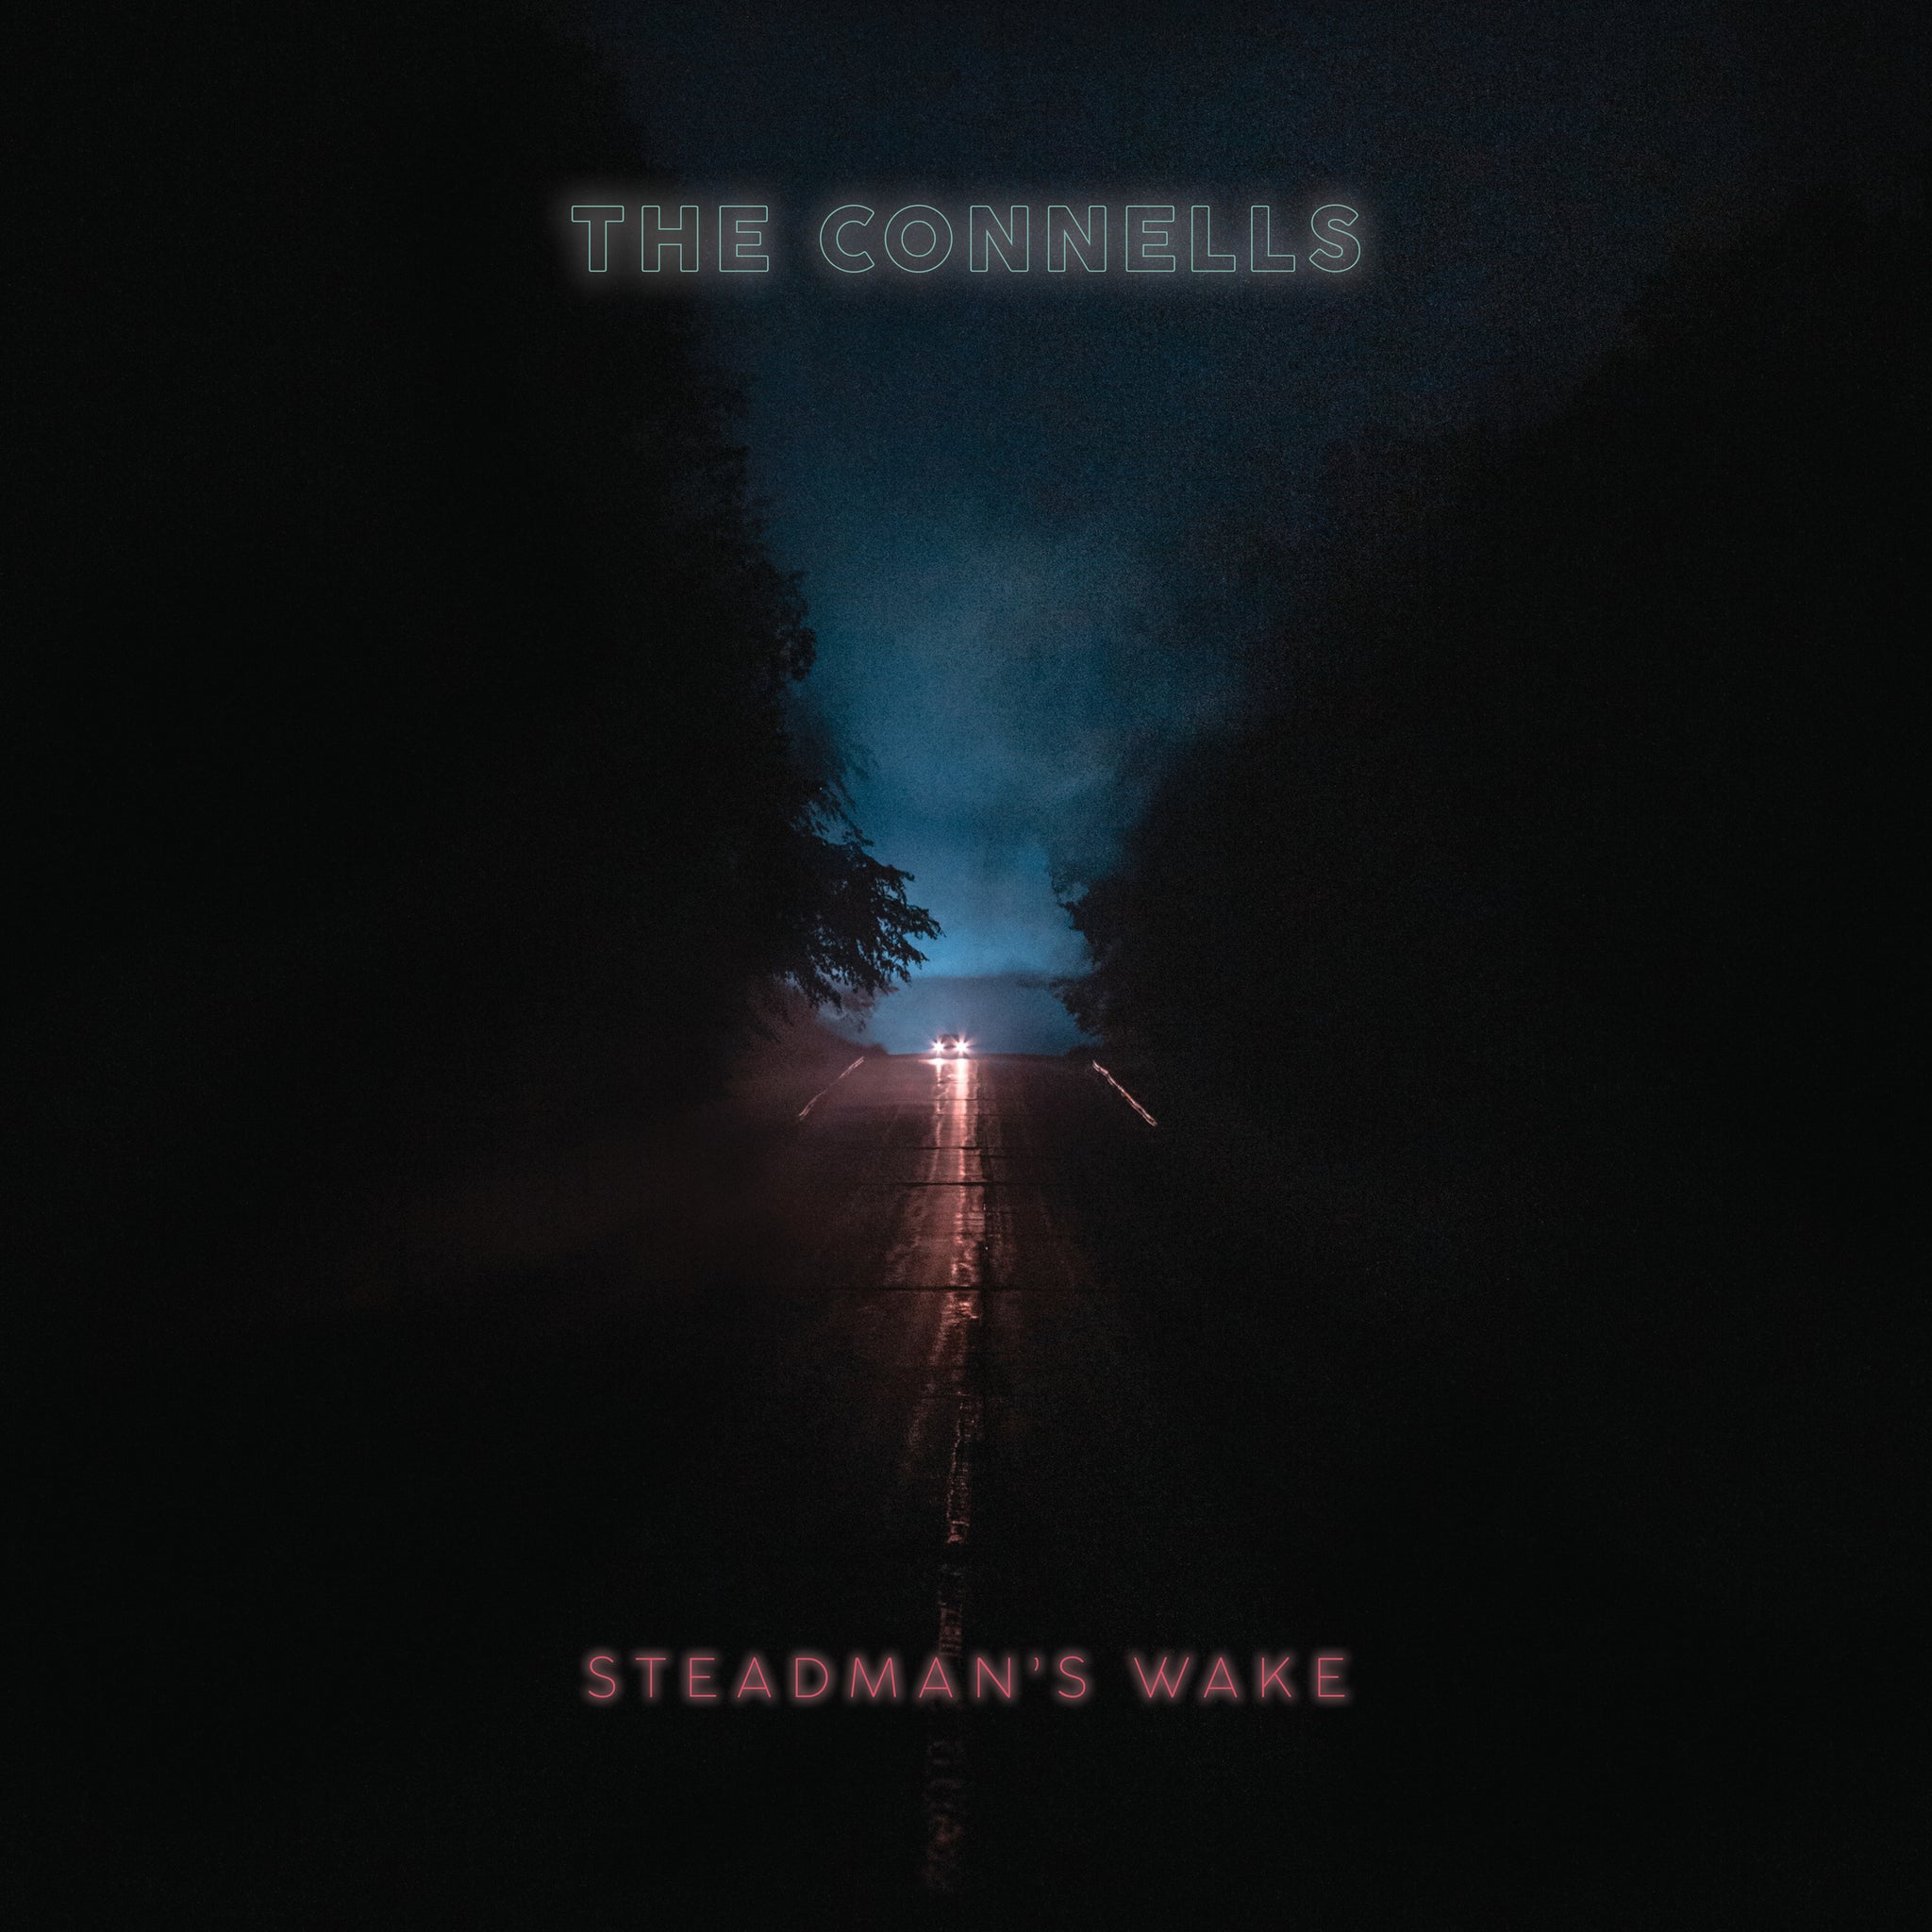 The Connells - Steadman's Wake